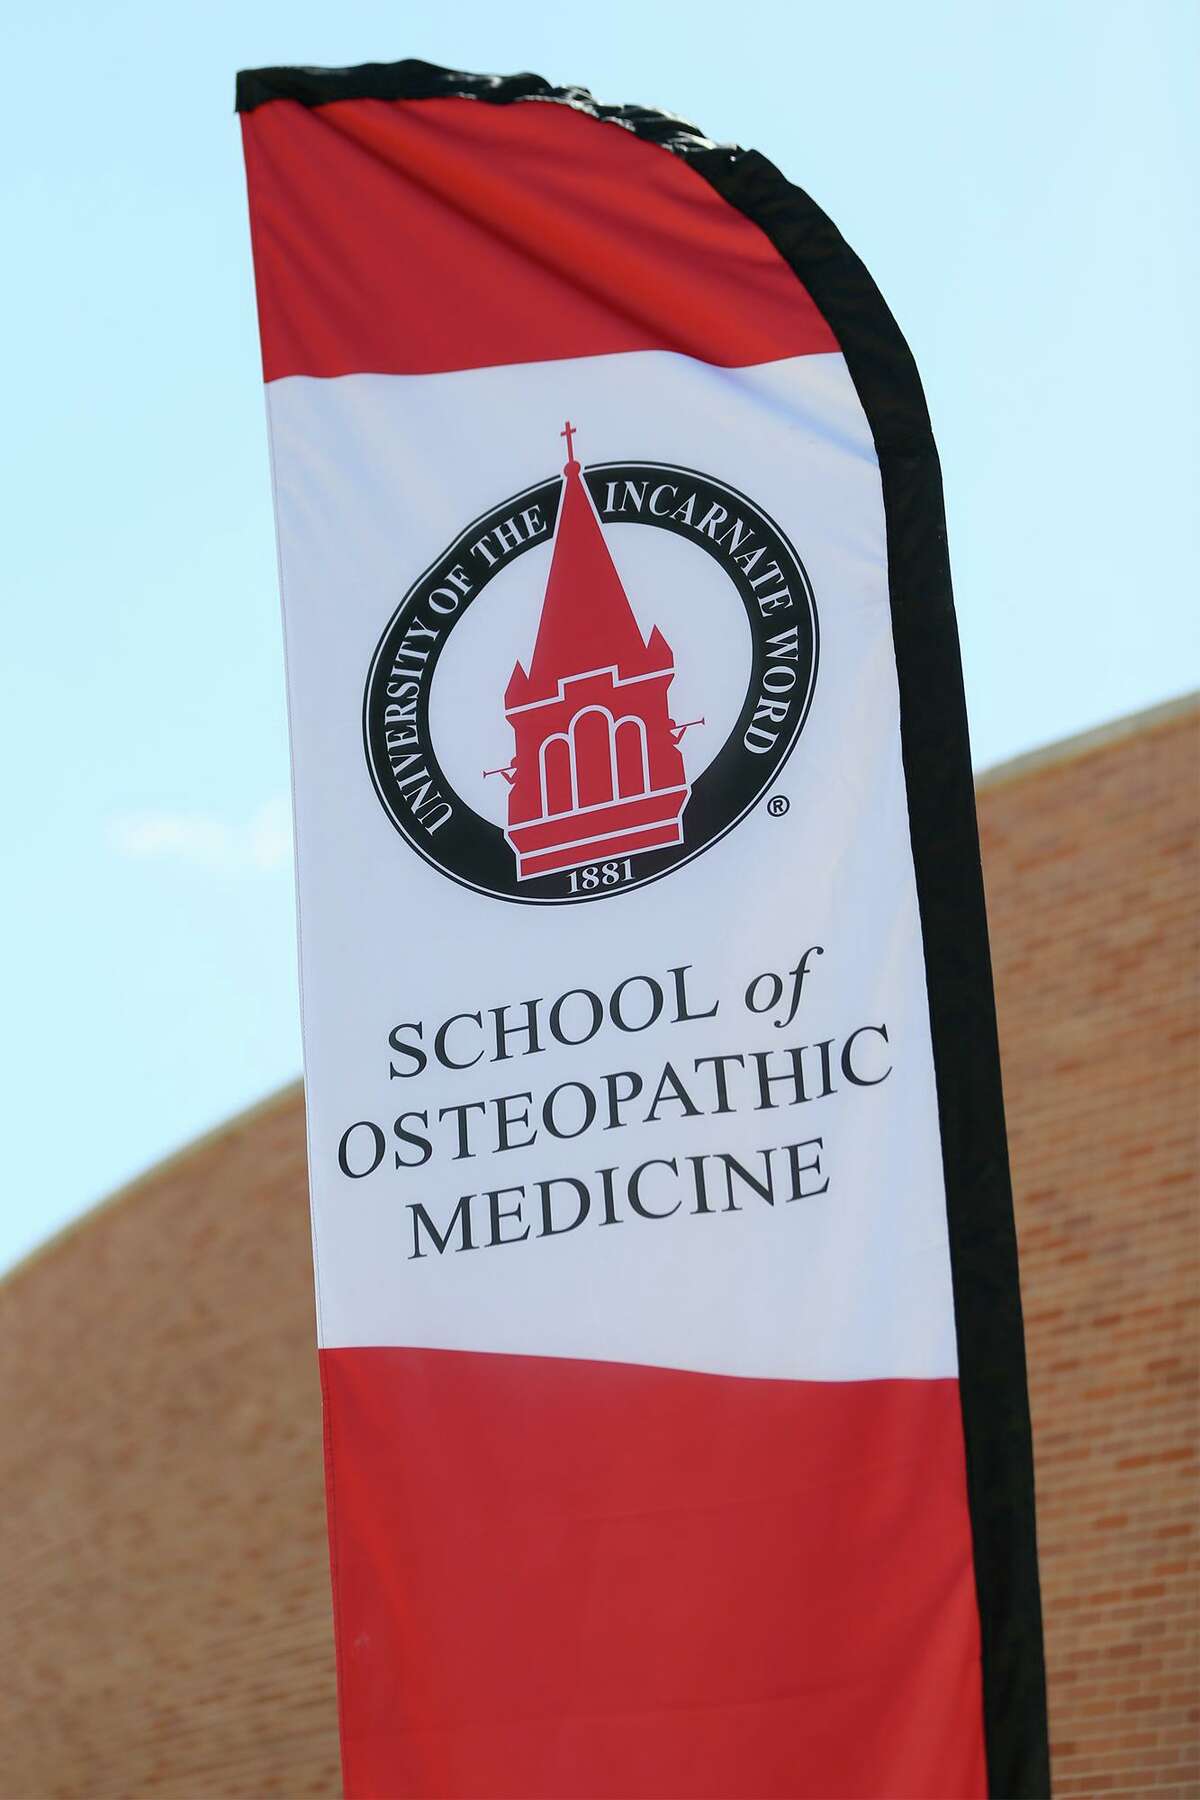 A banner flies outside UIW's School of Osteopathic Medicine at Brooks. On Friday, the university announced it has purchased seven building at South Side mixed-use development to house its health professions programs.